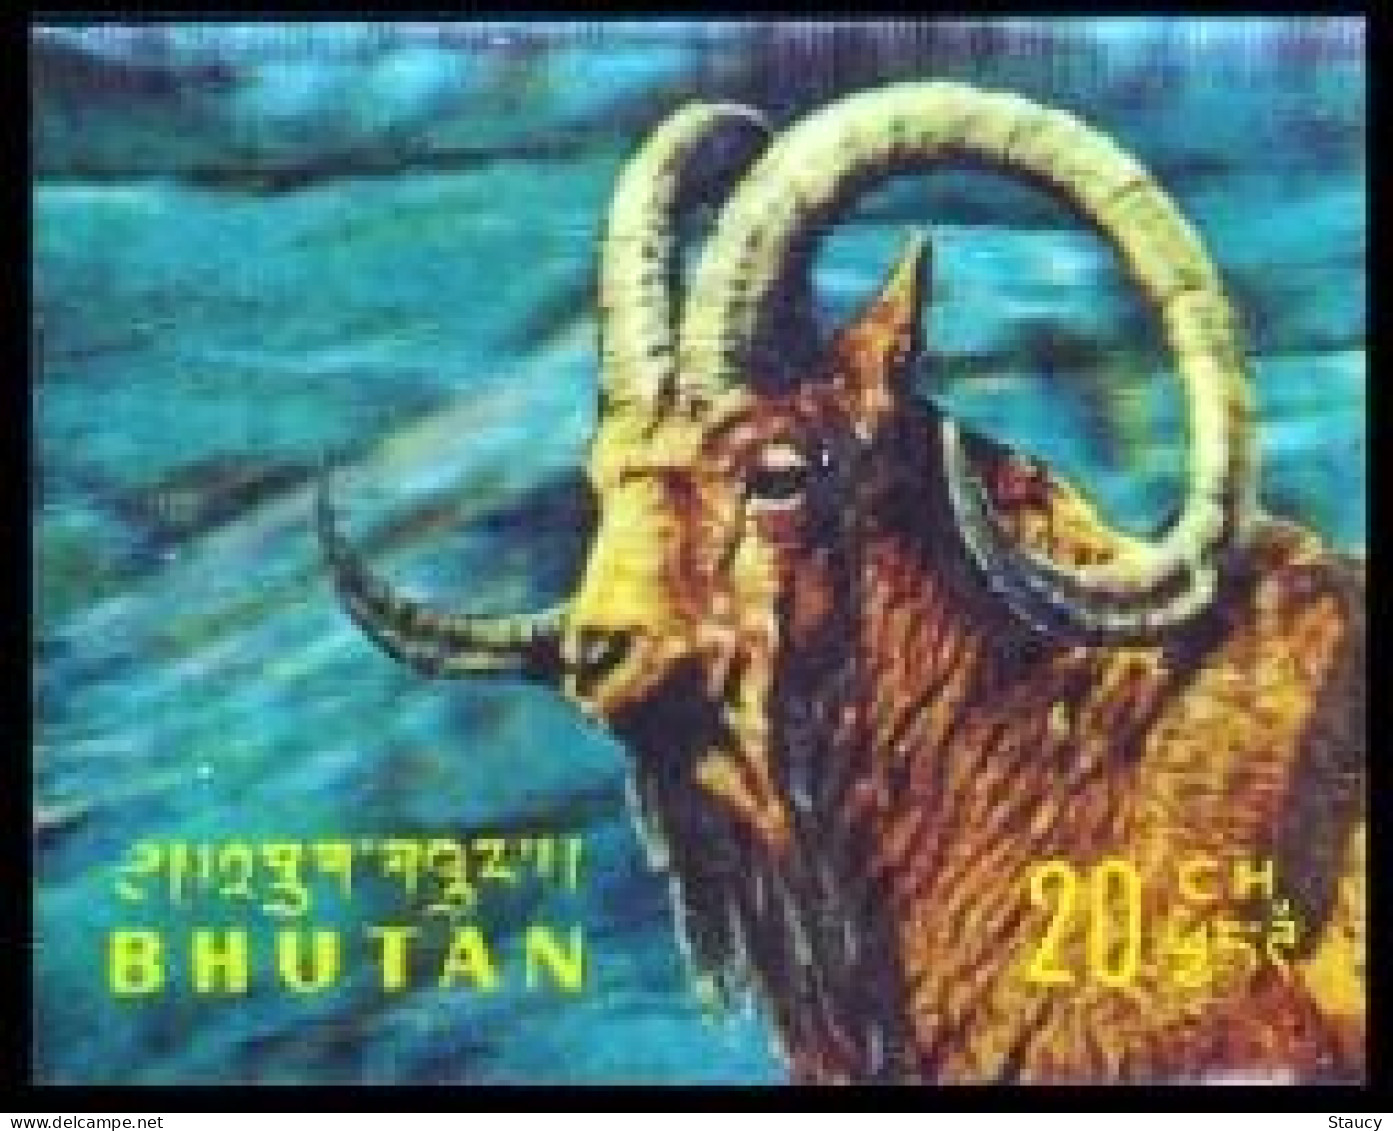 Bhutan 1970 Wild Animals Series Plastic - 3d Odd / Unique Stamp MNH As Per Scan - Oddities On Stamps